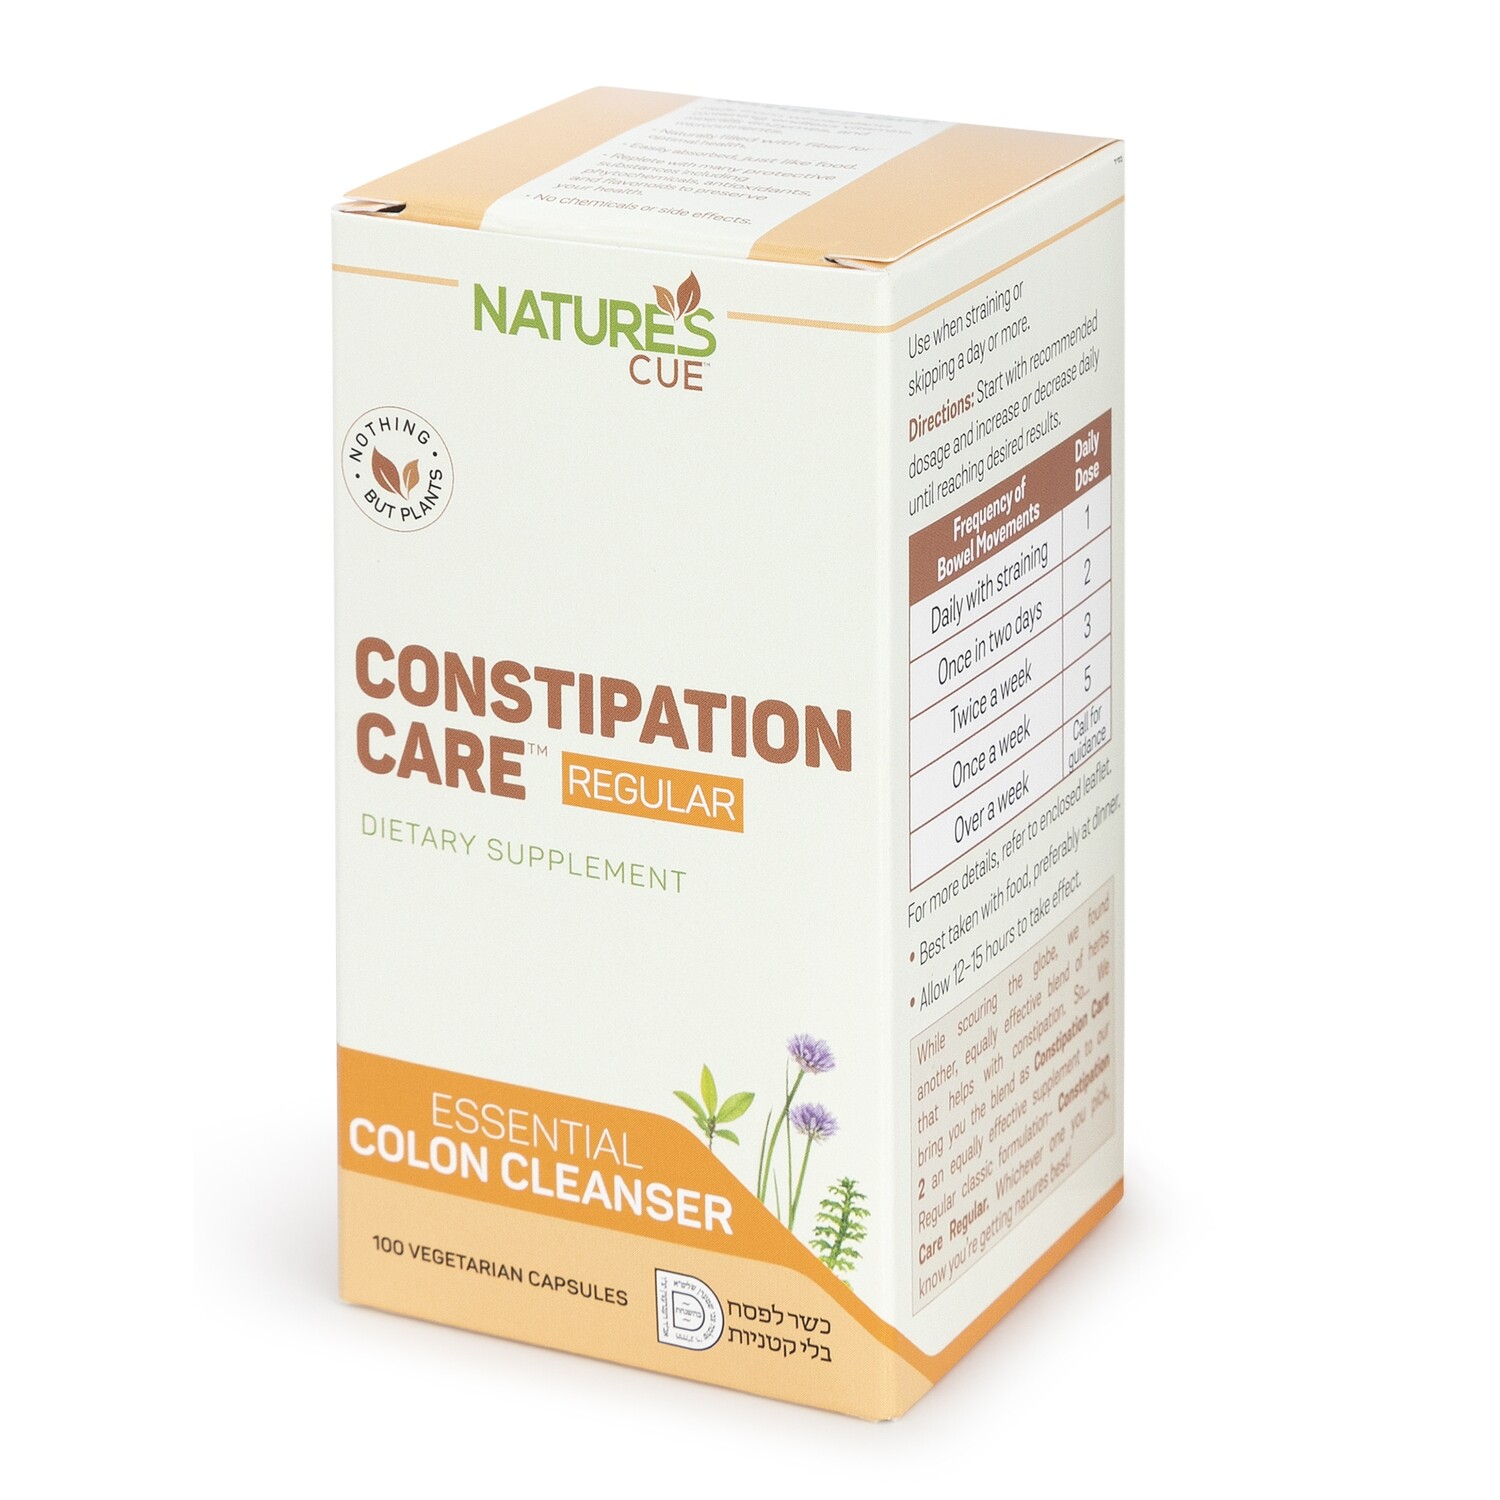 Natures Cue, Constipation Care Regular - 100 Vegetarian Capsules - Kosher for Passover